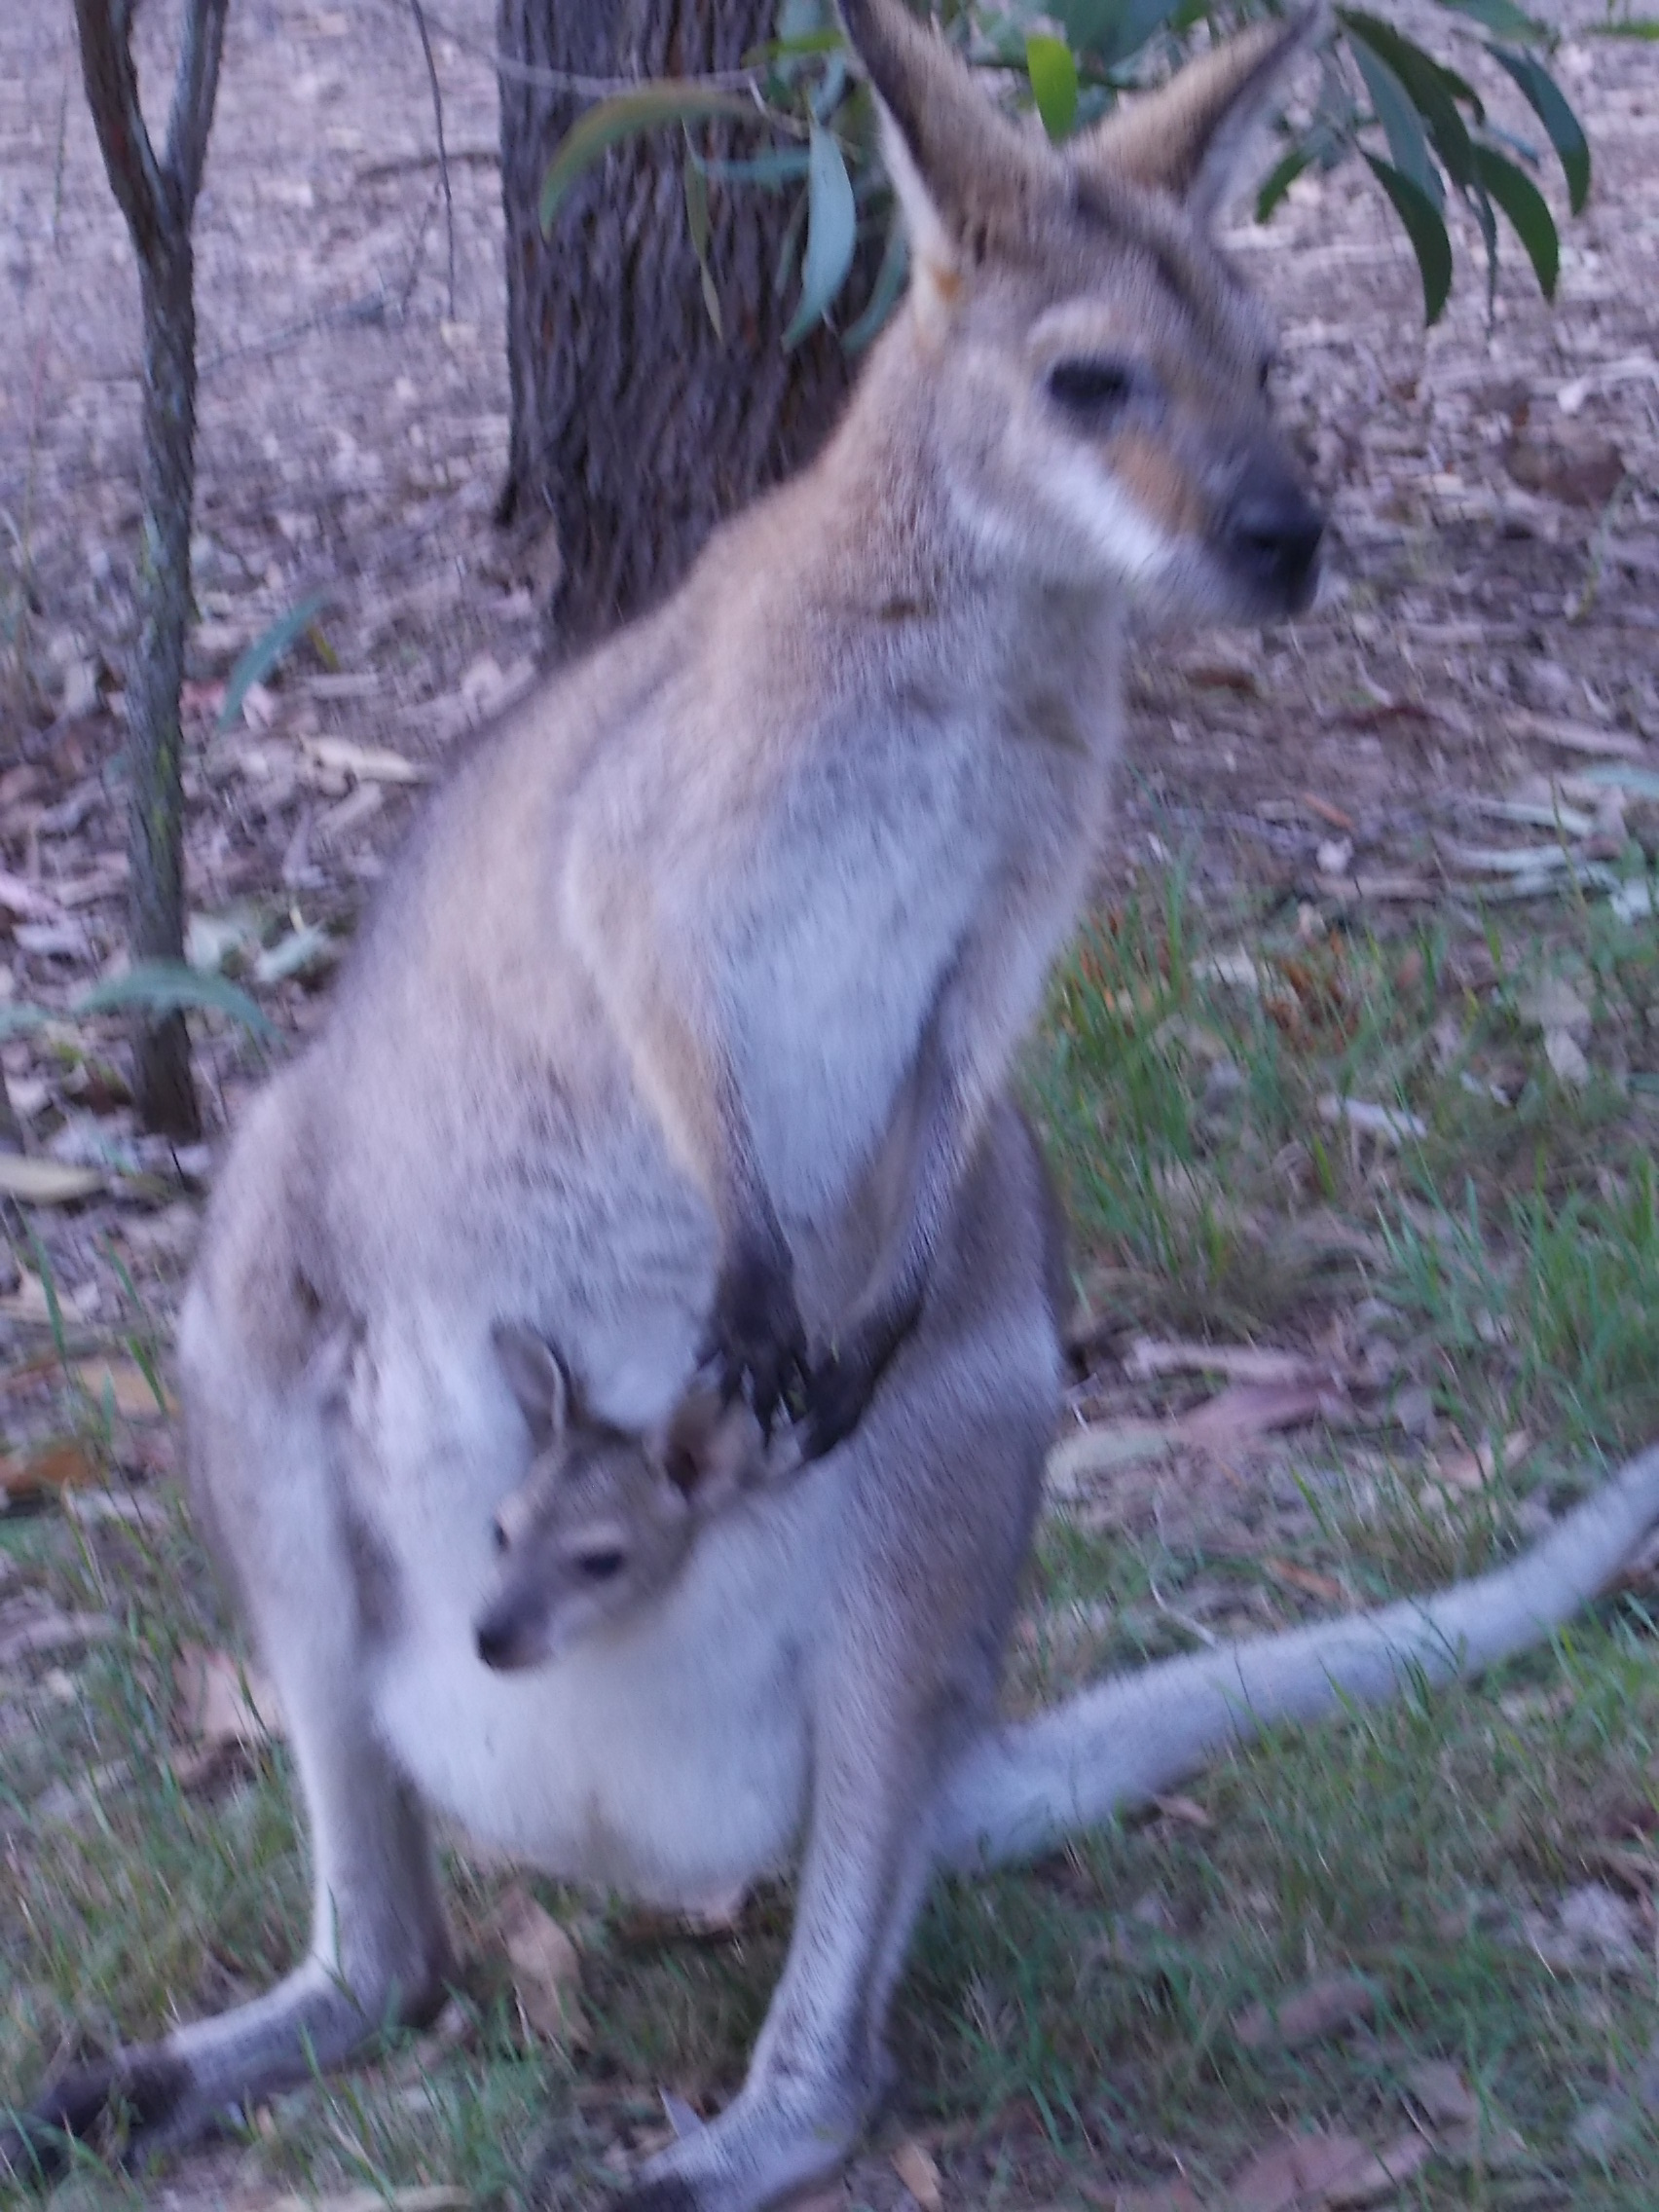 Wallaby and Joey in its pouch